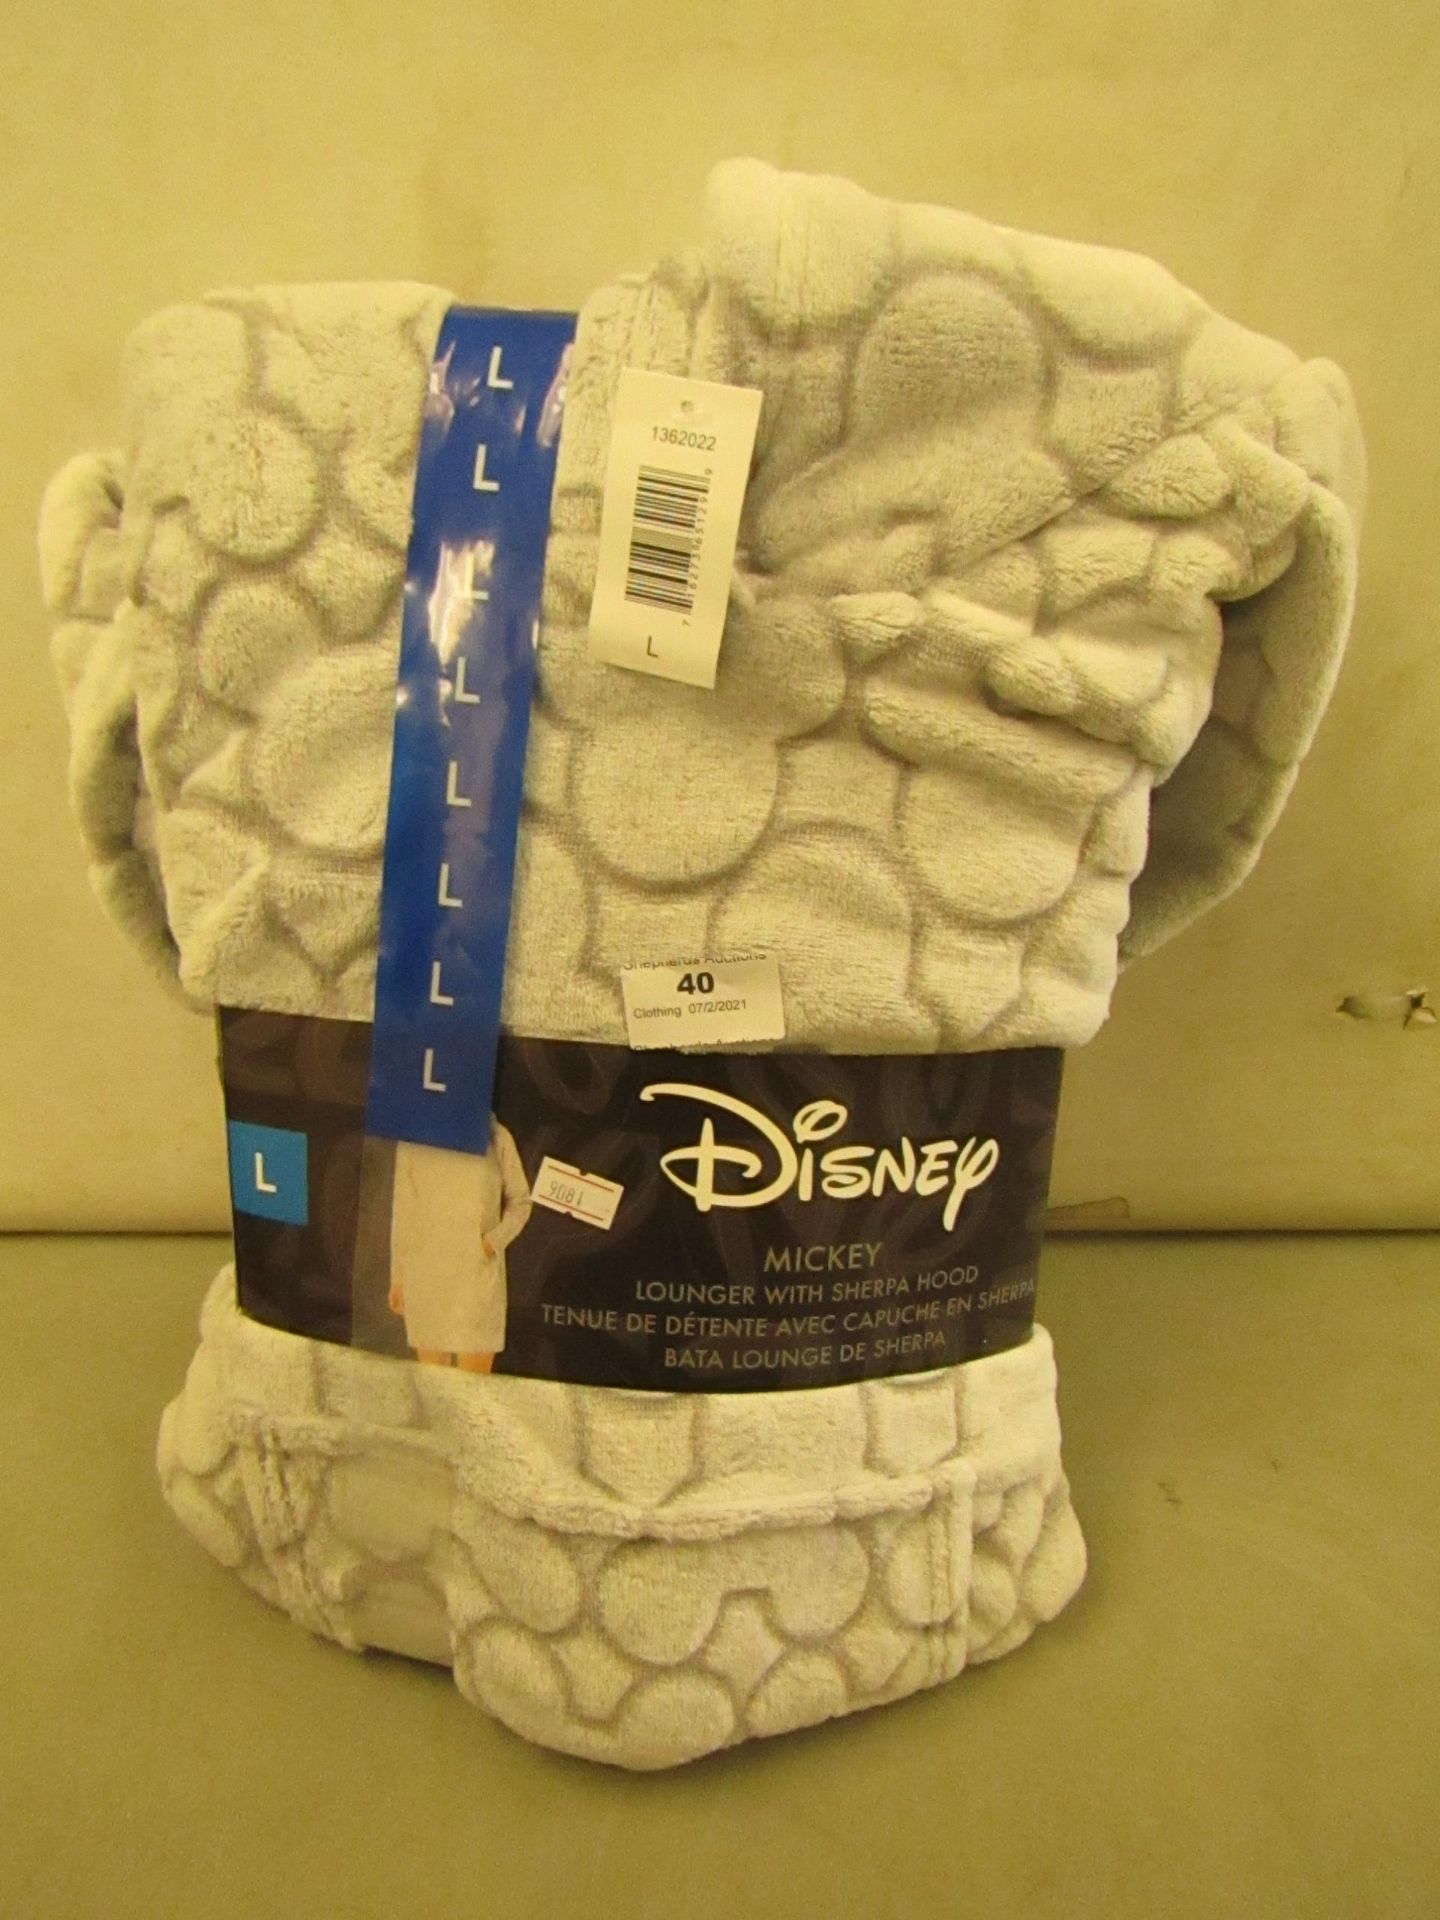 Disney Mickey Lounger With Sherpa Hood Size L New in Packaging